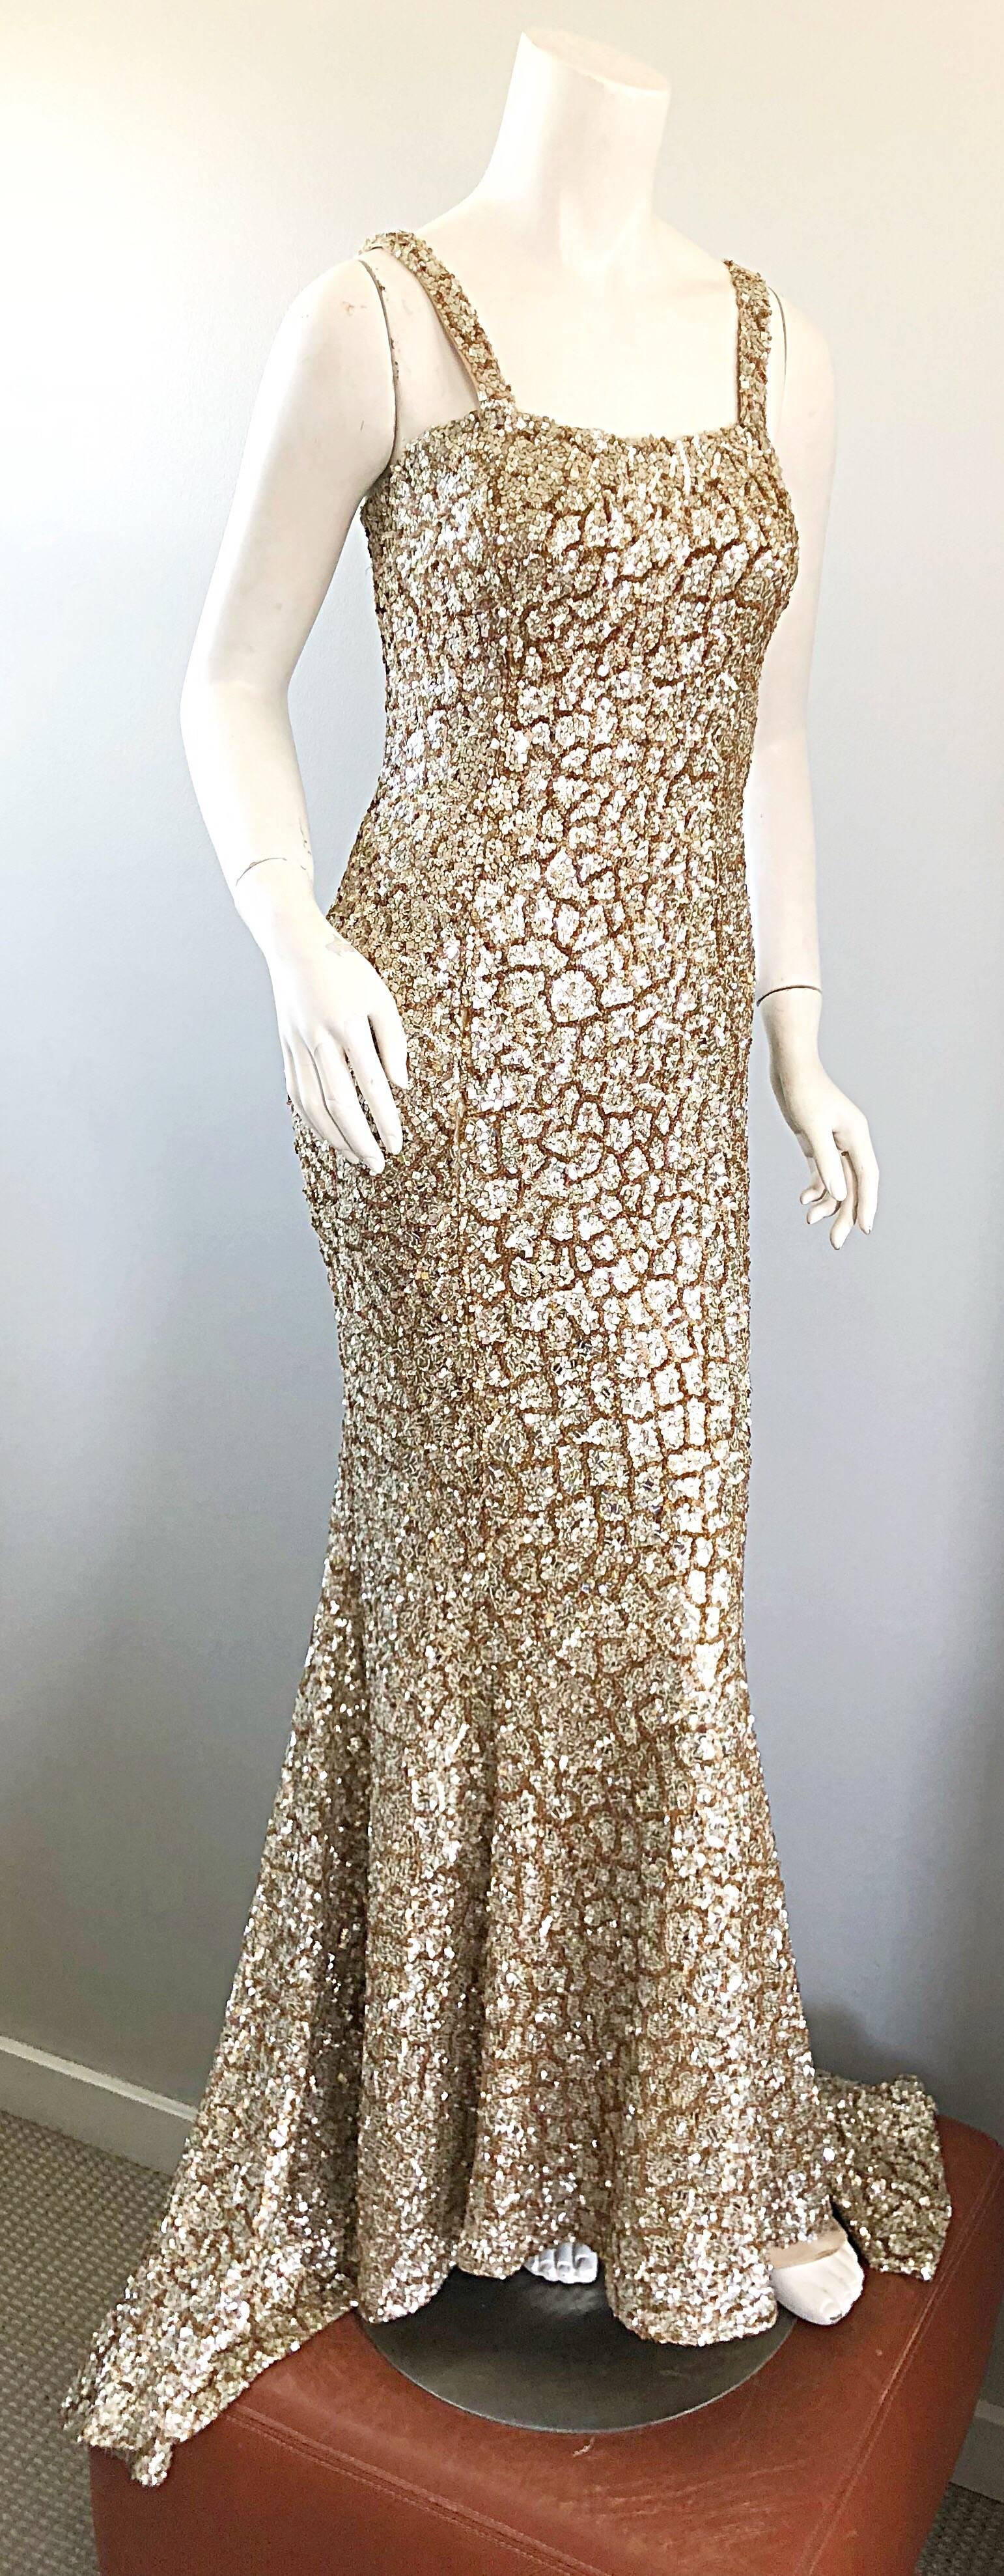 Monique Lhuillier Gorgeous Resort 2012 Gold Rose Gold Full Sequin Trained Gown  8